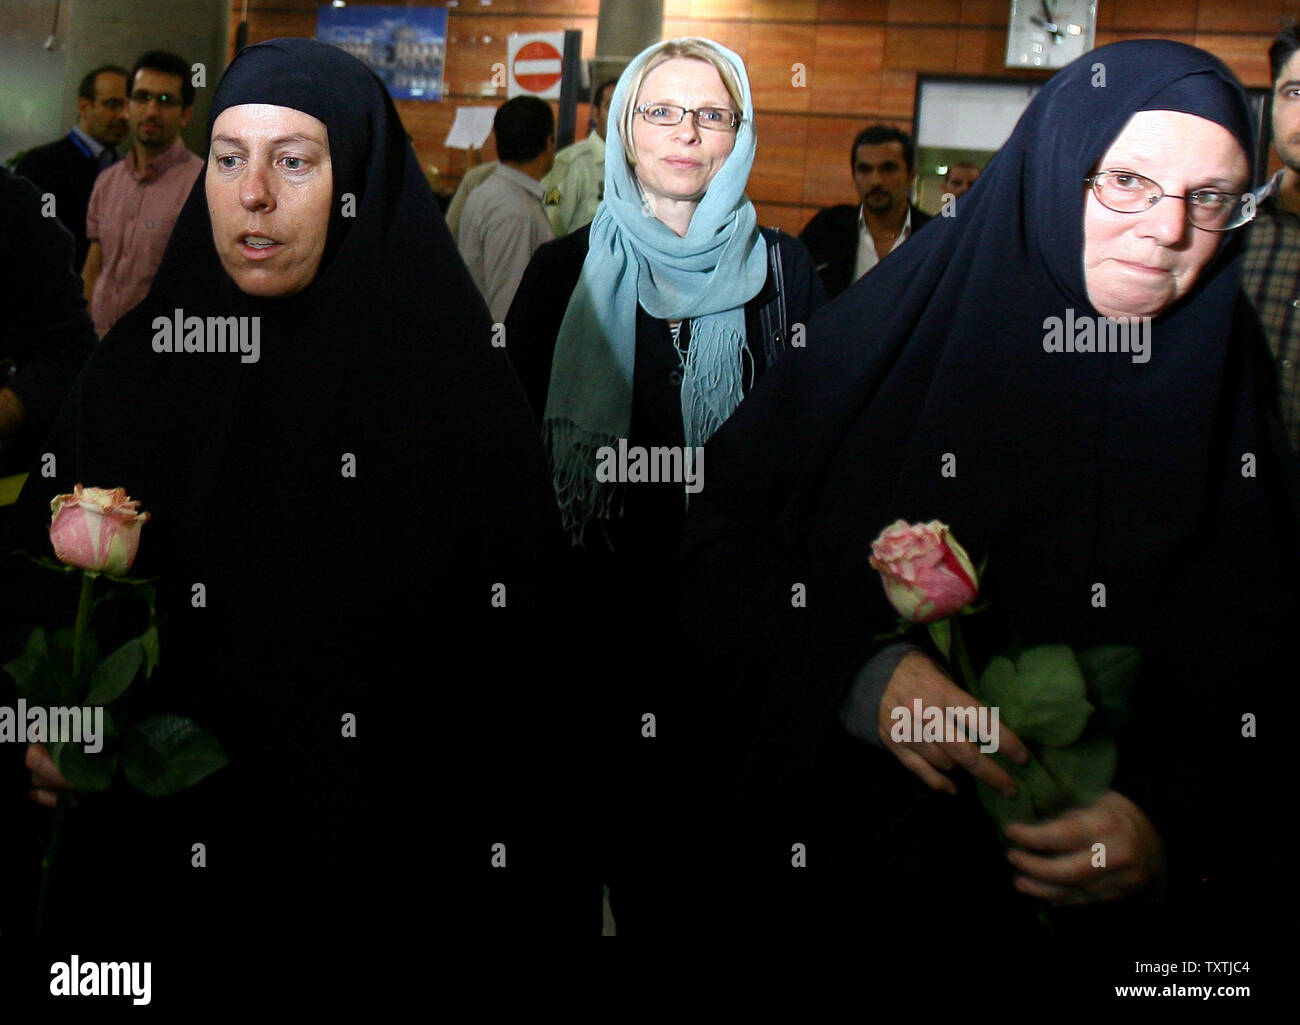 Cindy Hickey (L), and Nora Shroud (R), walk with Swiss ambassador to Iran Livia Leu Agosti, (C) at Imam Khomeini Airport in Tehran, Iran on May 19, 2010 to visit their children. Shane Bauer, 27, Sarah Shourd, 31, and Josh Fattal, 27, were detained on July 31,2009 after straying across Iran's border while on a hiking trip in northern Iraq's Kurdistan region.       UPI/Maryam Rahmanian Stock Photo